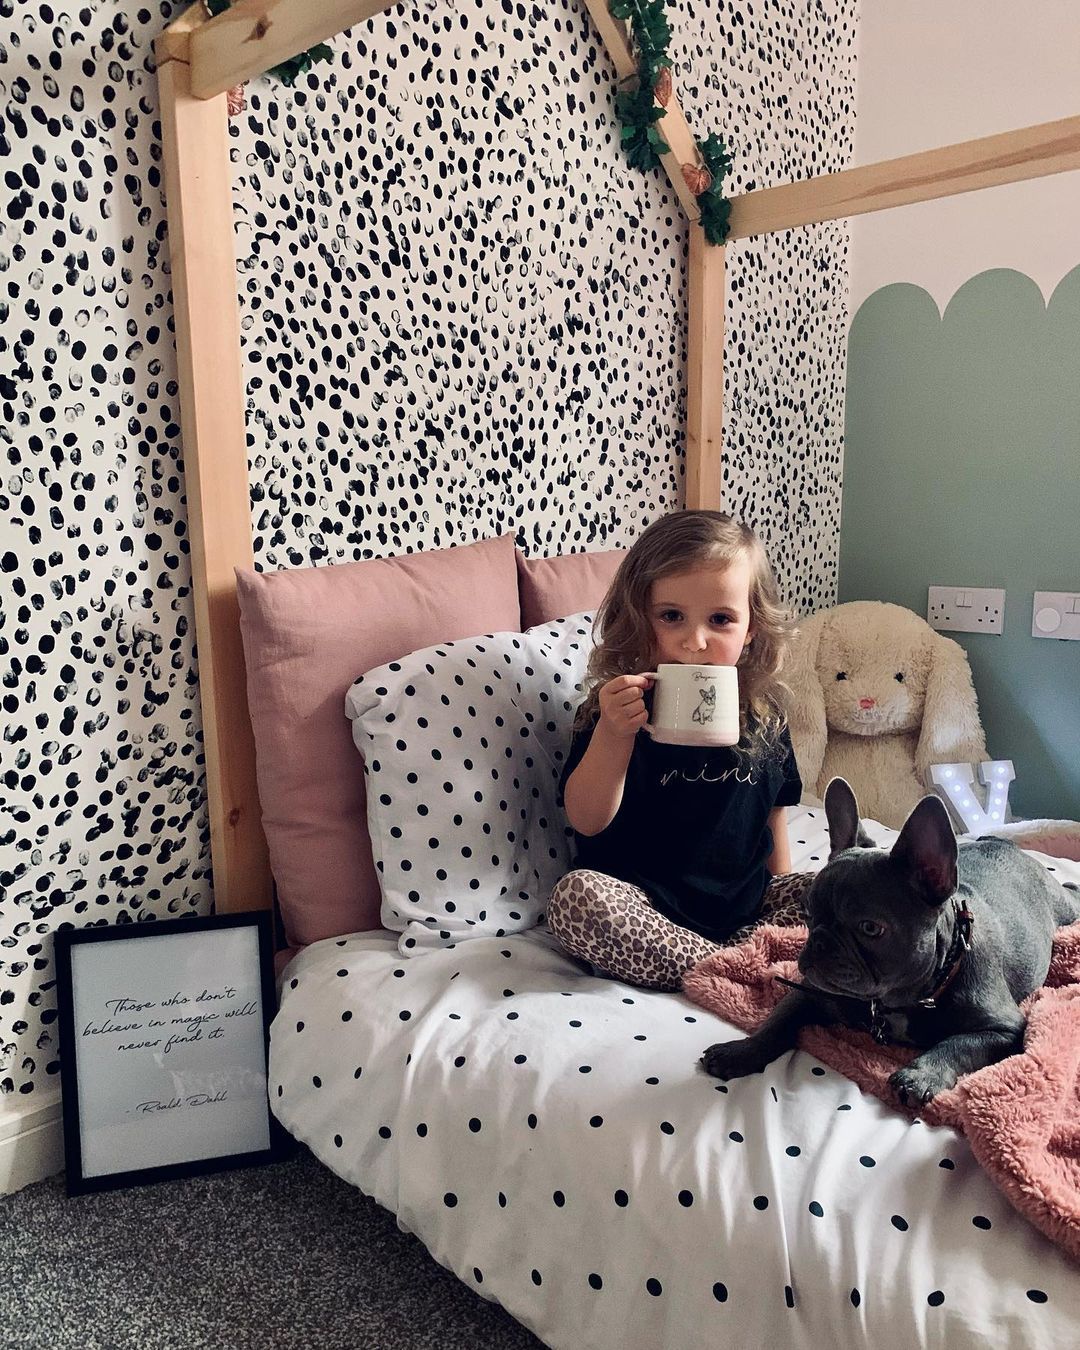 A child sitting on her bed with a cup and her dog